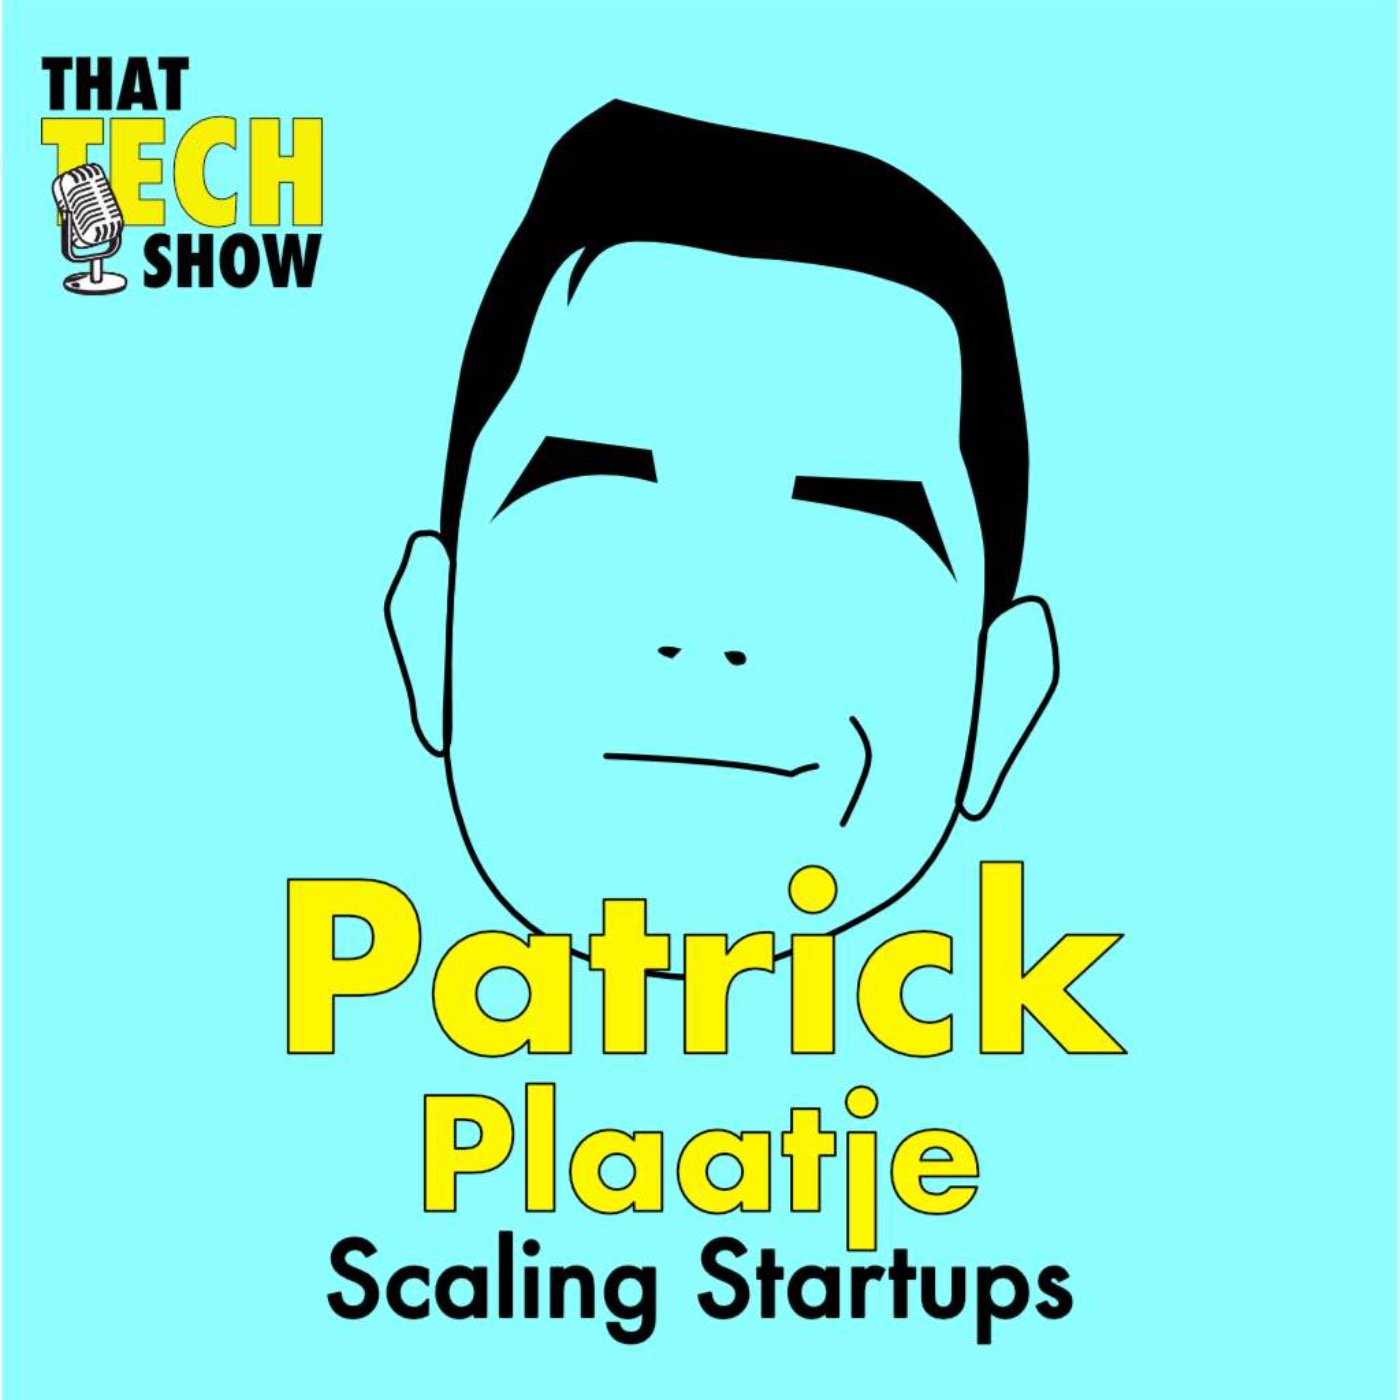 Episode 6 - Scaling Startups with Patrick Plaatje